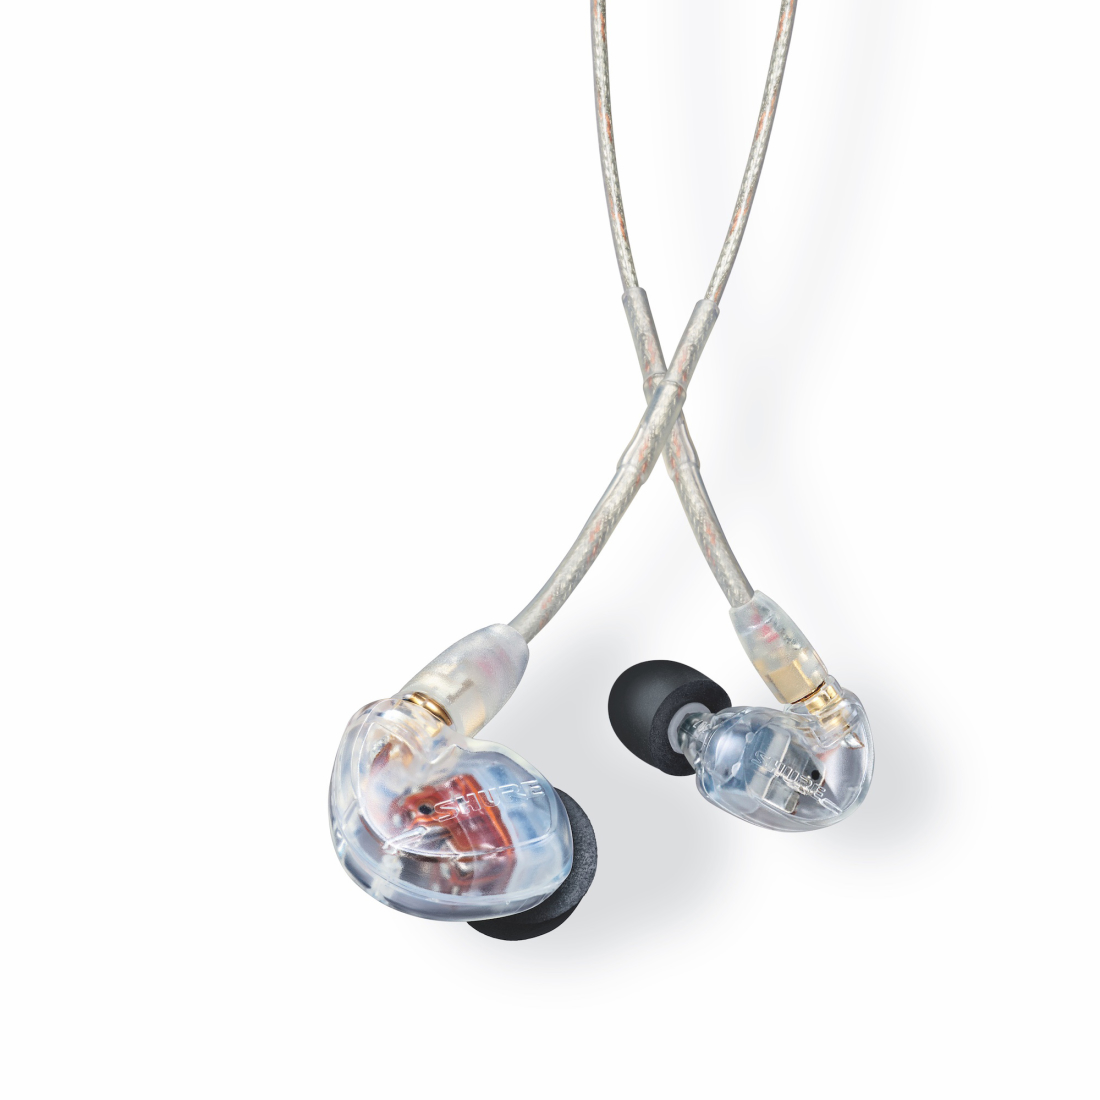 SE535 - Sound Isolating Earphones - Clear